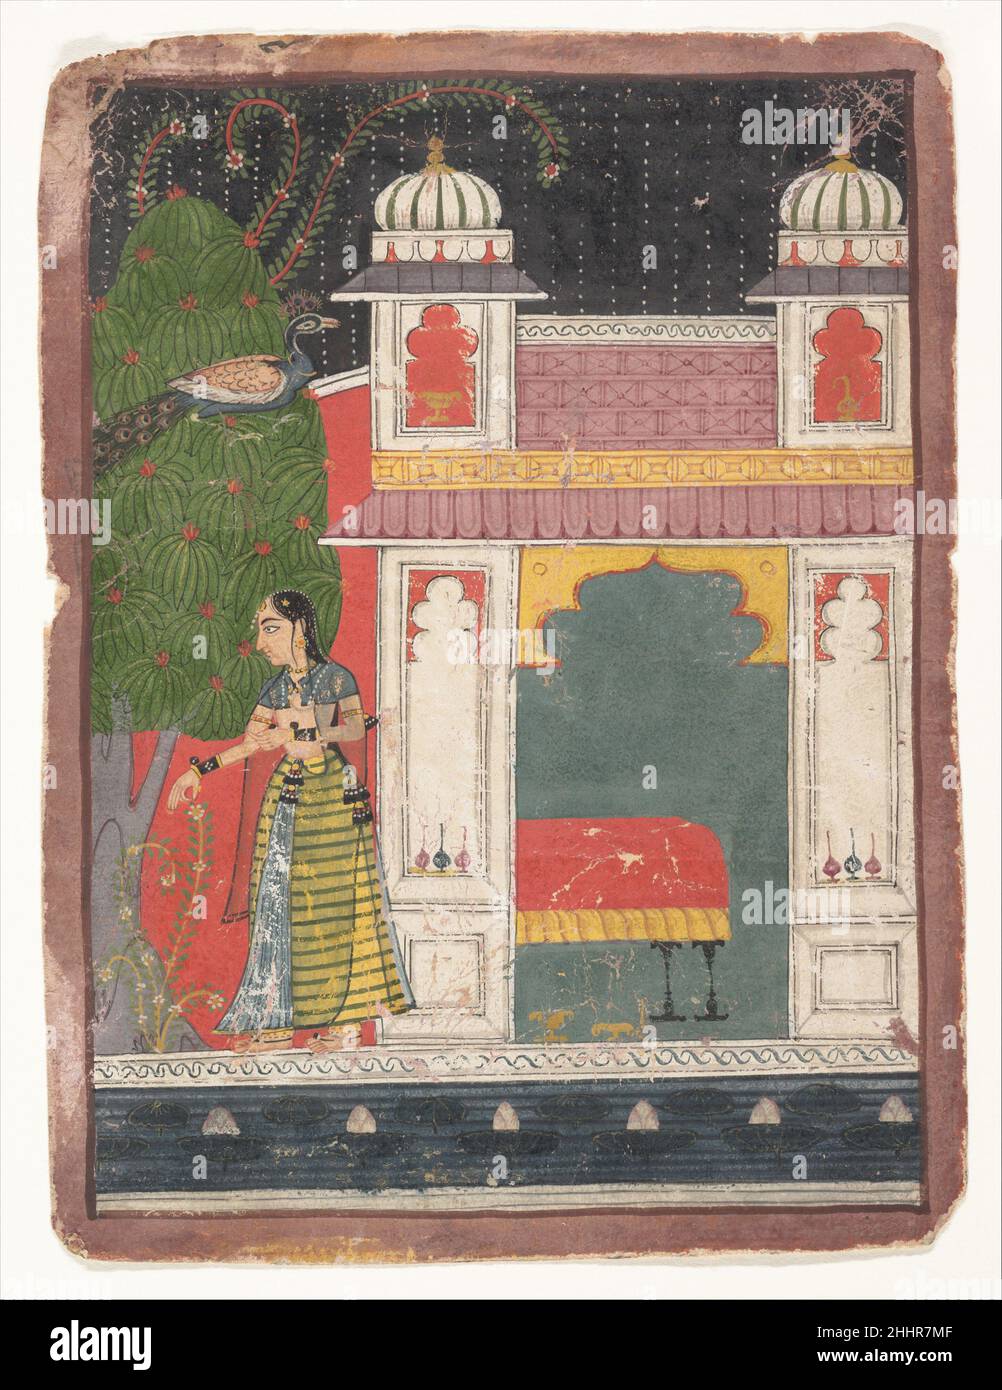 A Heroine Plucking a Flower: Page from a Dispersed Nayikabheda ca. 1660–80 India (Madhya Pradesh, Malwa) The artist instilled this painting with an iconography of longing: the empty bed, the solitary nayika (heroine), and the forlorn call of the peacock. The patterned raindrops, stylized creepers, and surface treatment of the architecture distinguish this manuscript from other work done in the Malwa courts. The figural type suggests an awareness of the Mewar or Bundi traditions; the use of a black sky and a red color field behind are typical of the archaic tastes of Malwa production, which sur Stock Photo